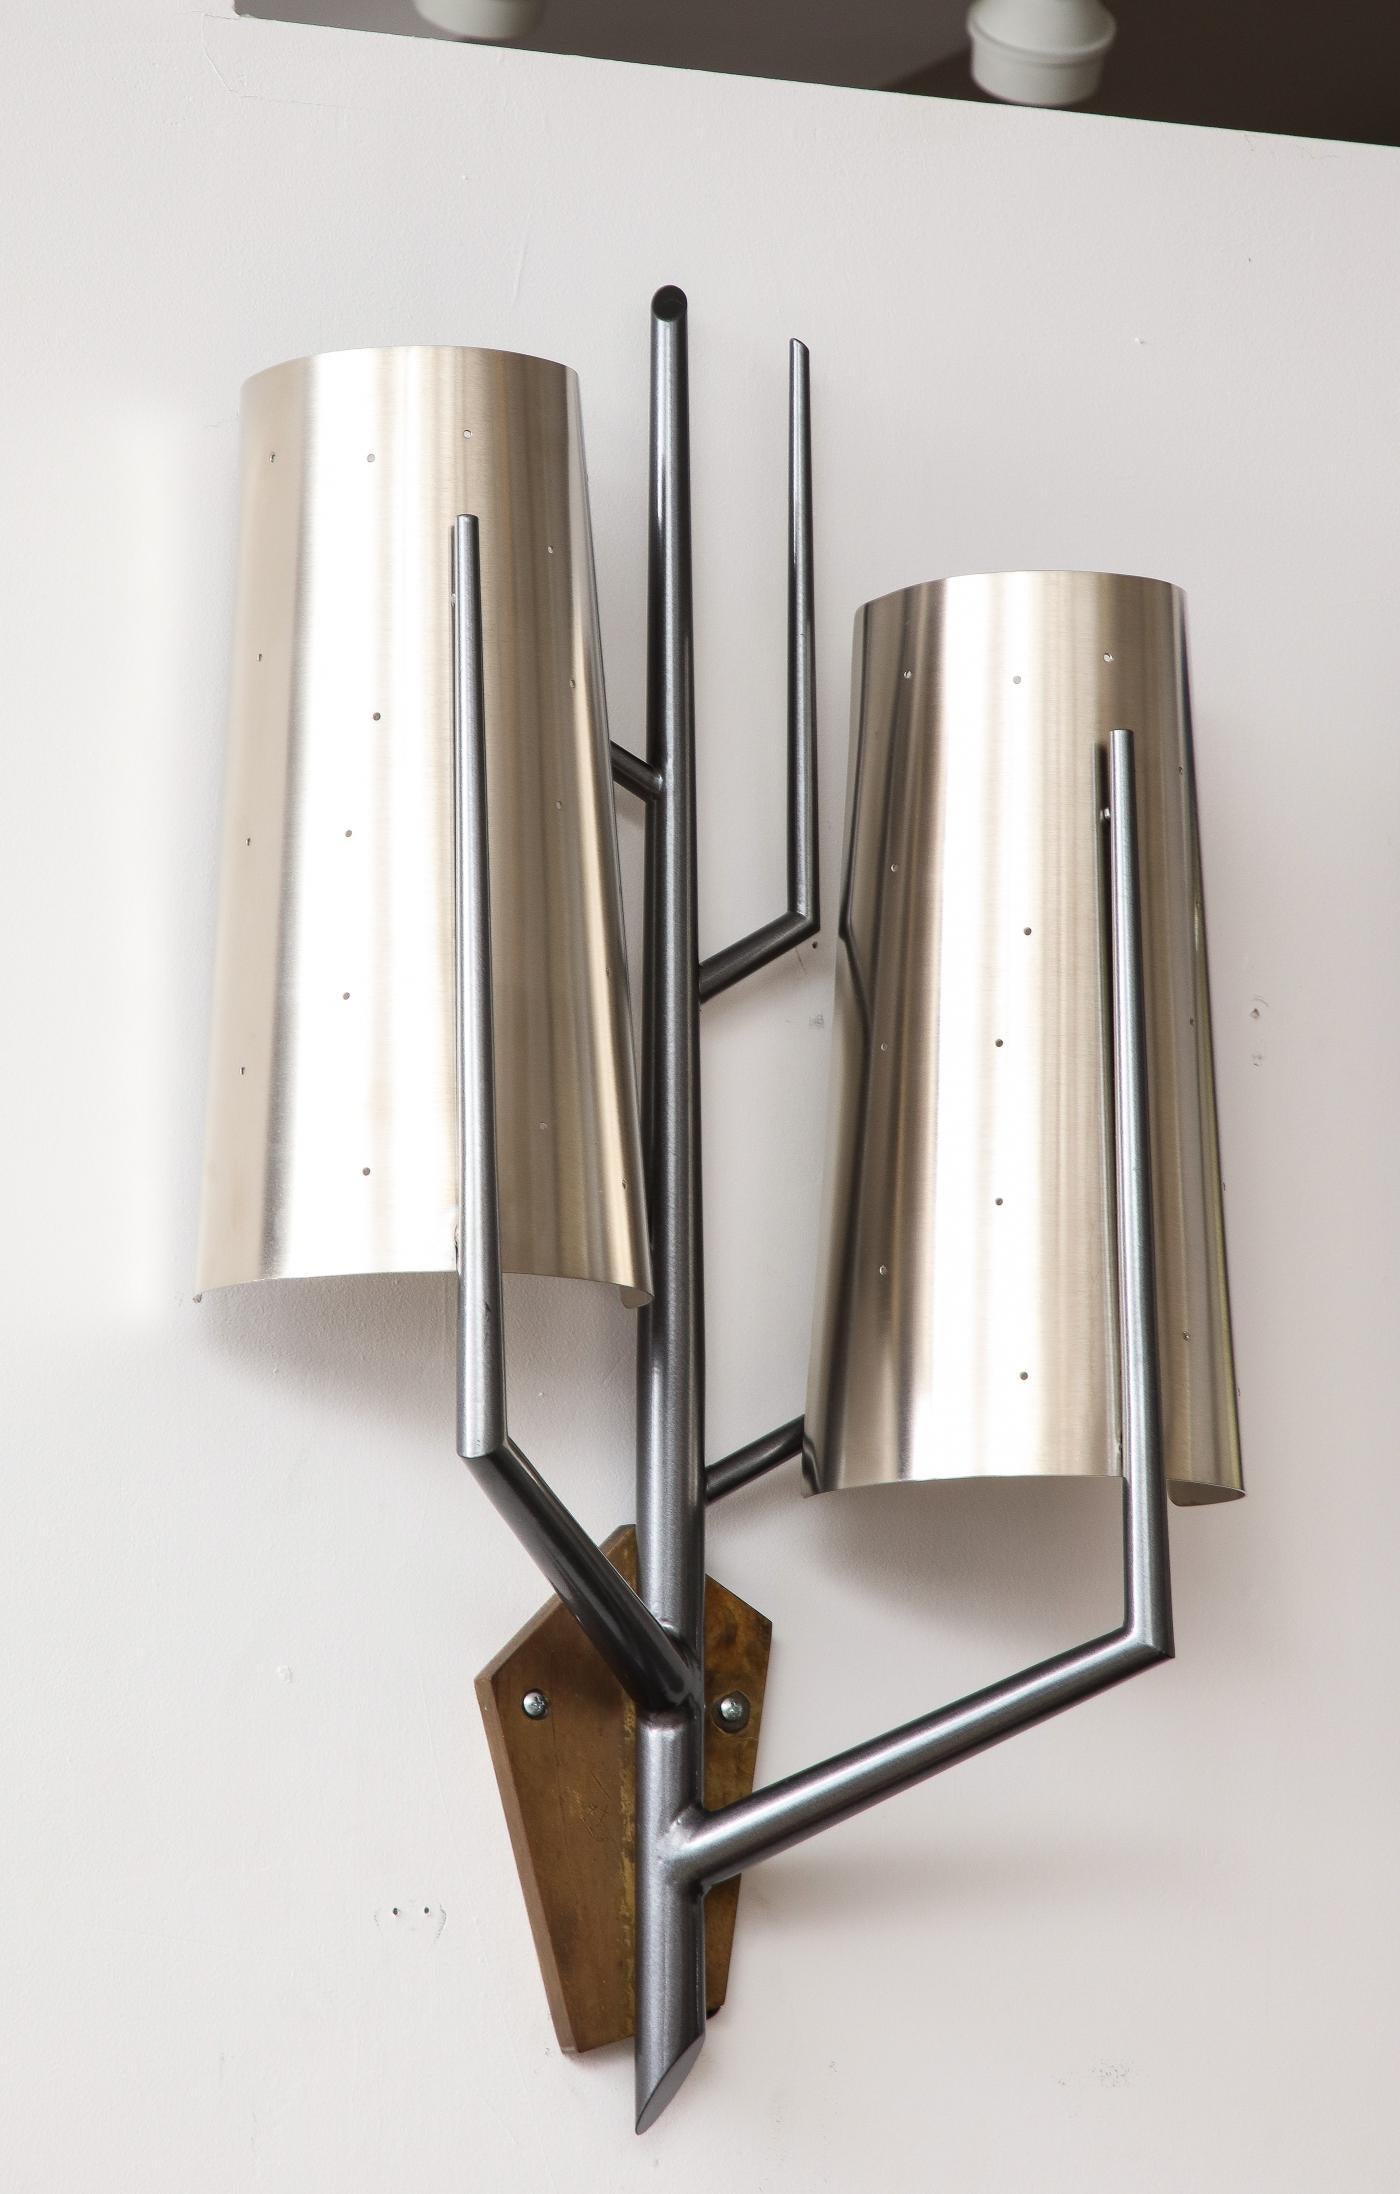 Stainless Steel Sconce in the Manner of Maison Charles, France

These monumental wall sconces are graphic and feature a beautiful contrast between polished and darkened steel.

